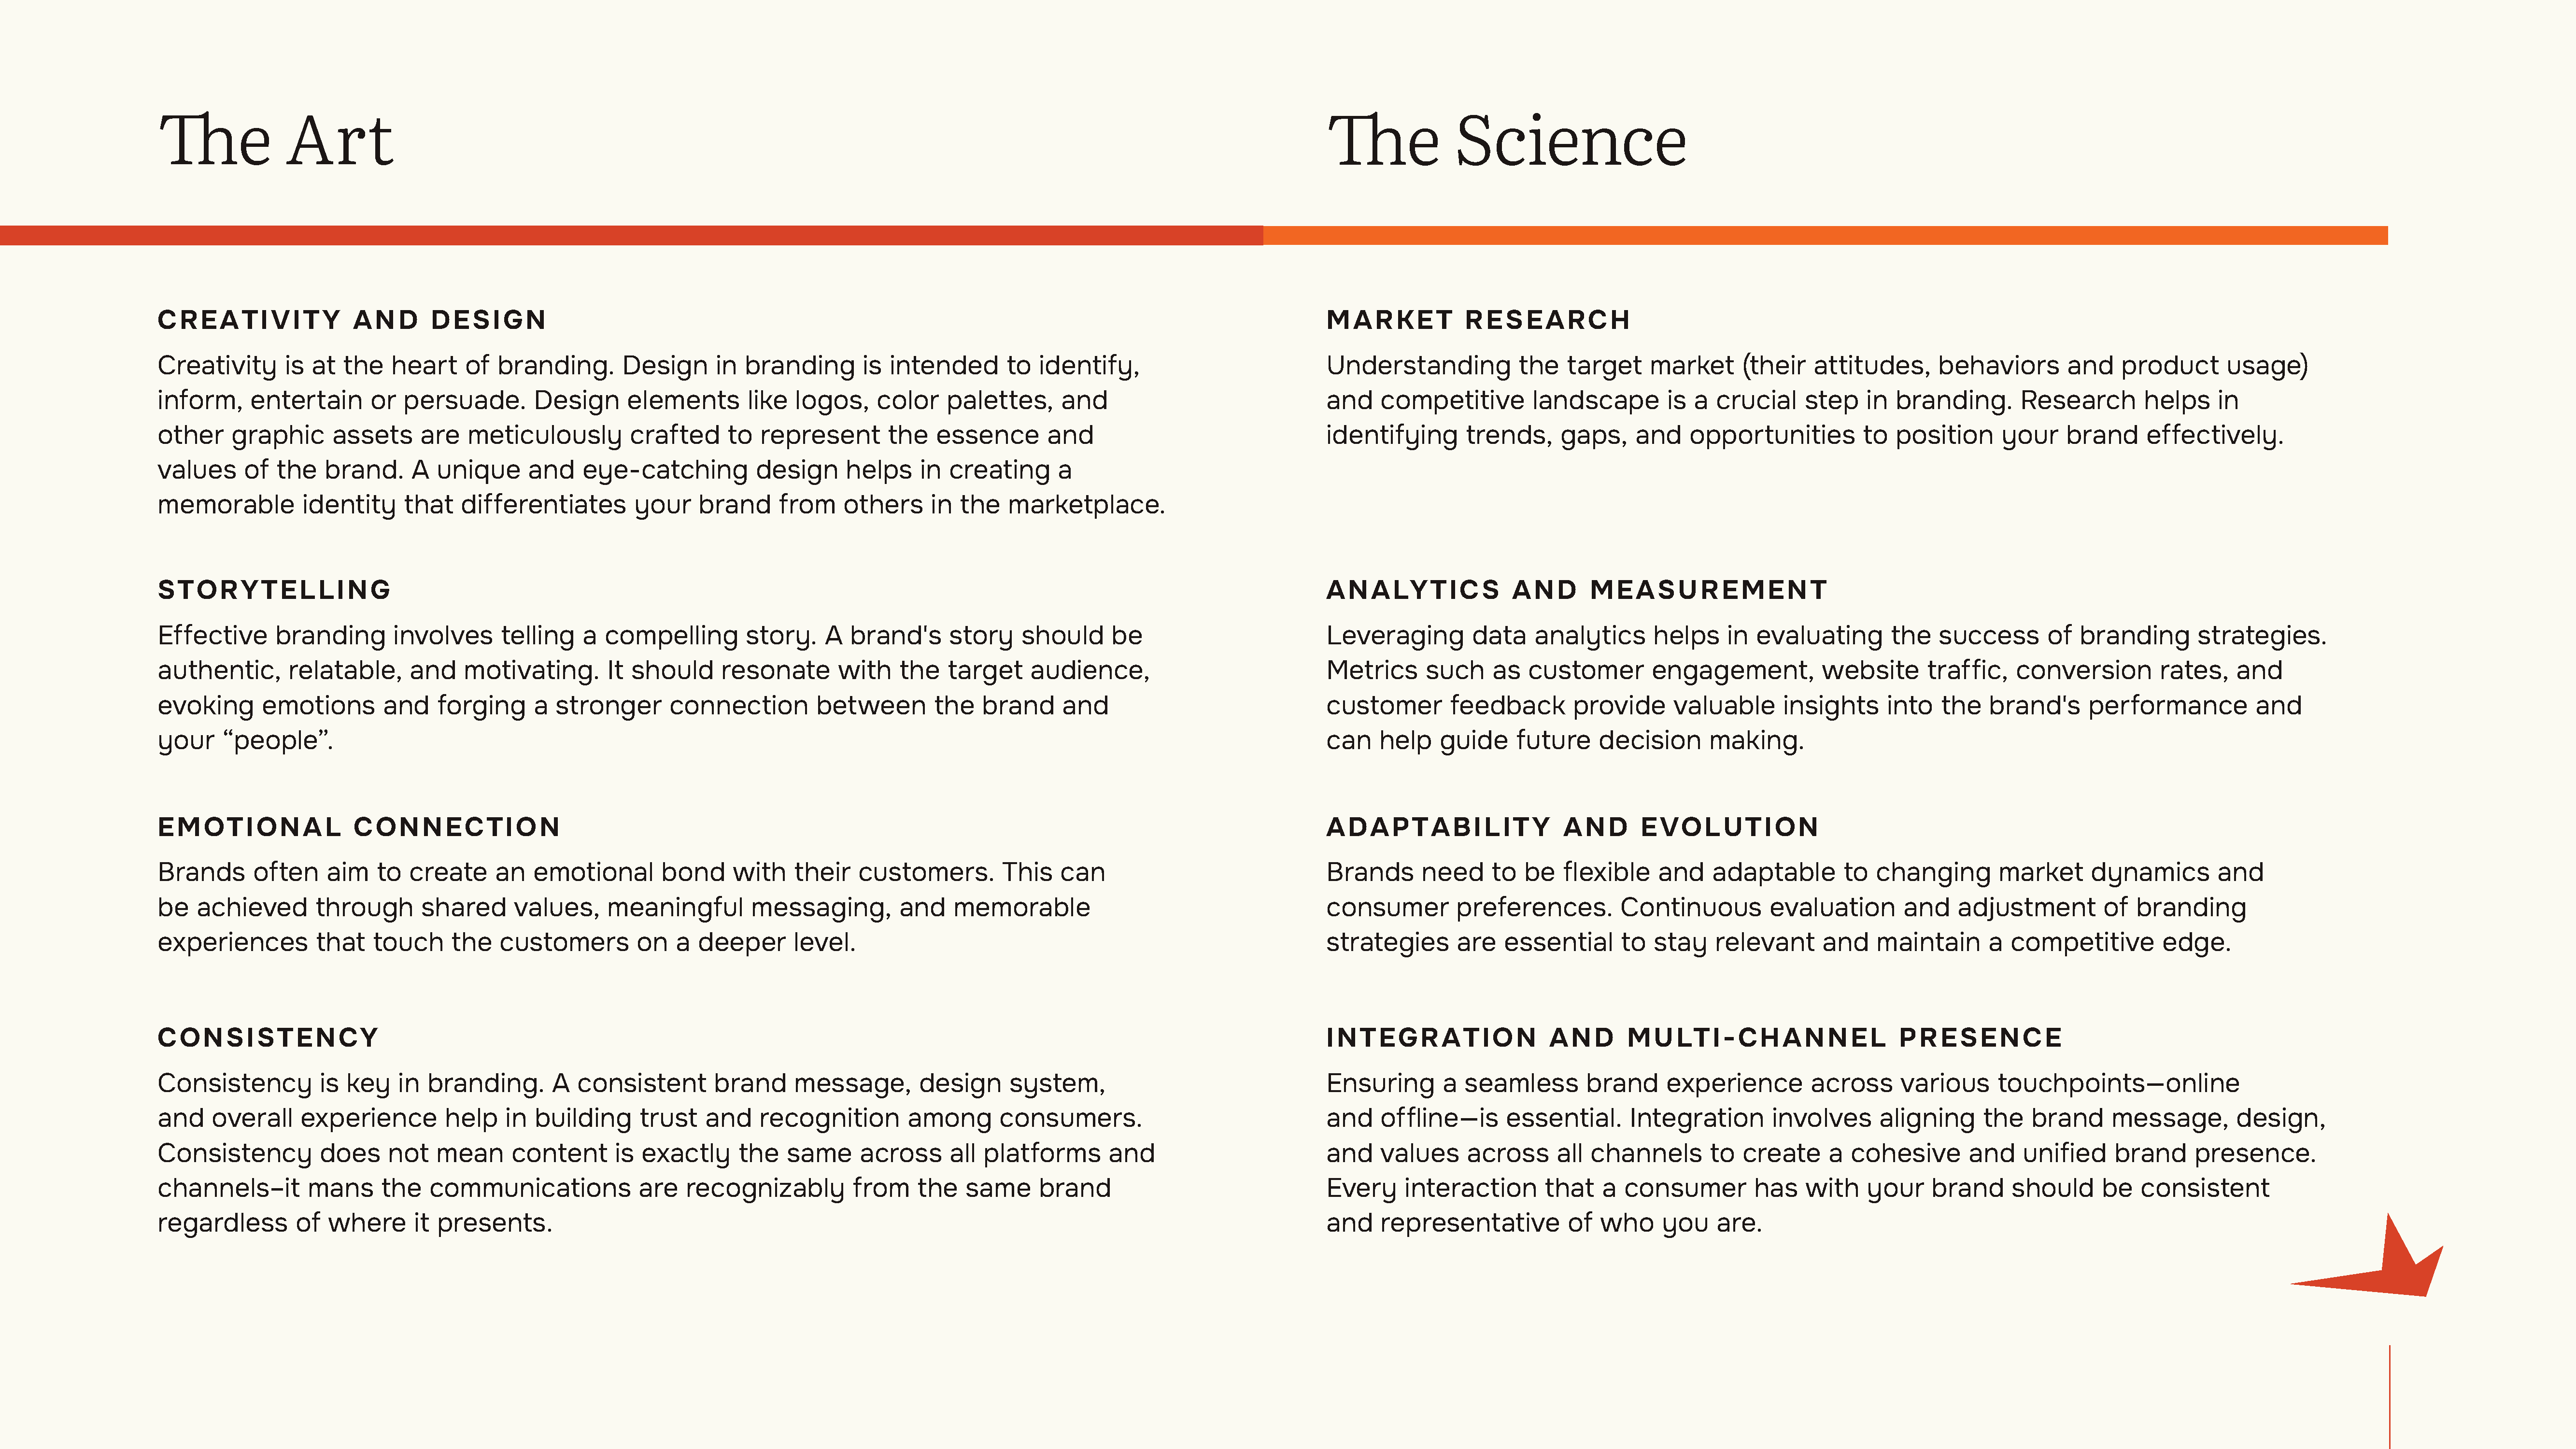 A chart showing the Art and Science elements of branding. 

The Art: Creativity & Design, Storytelling, Emotional Connection, Consistency, 

The Science: Market Research, Analytics & Measurement, Adaptability & Evolution, Integration & Multi-Channel Presence